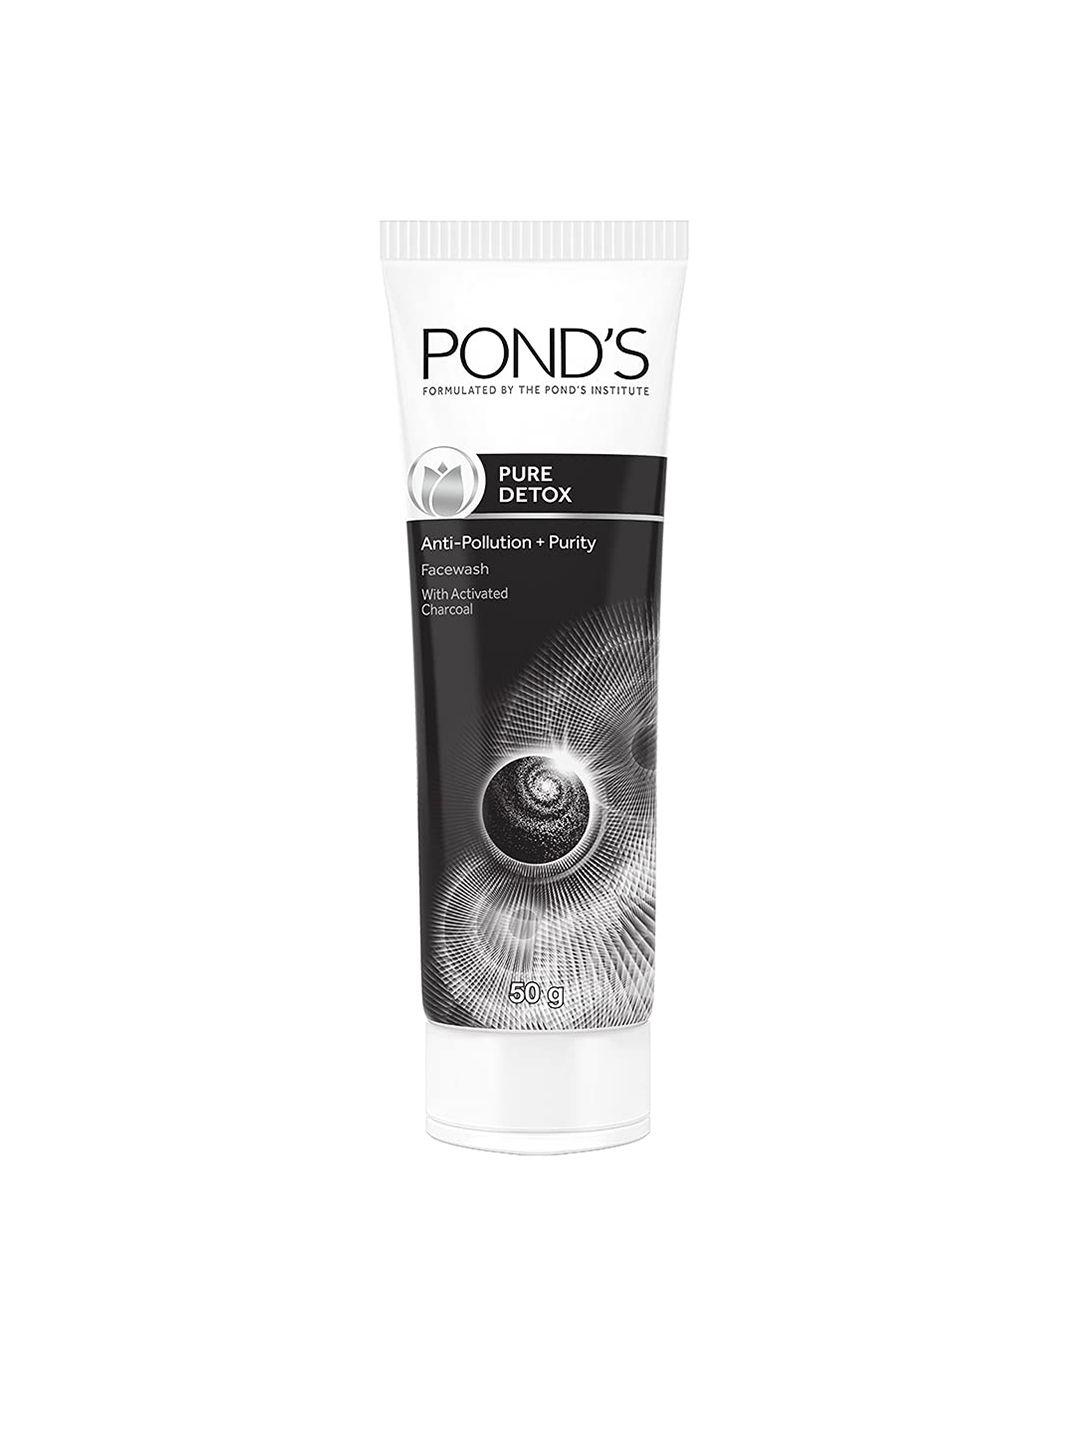 pond's-pure-white-anti-pollution-activated-charcoal-face-wash-50-gm